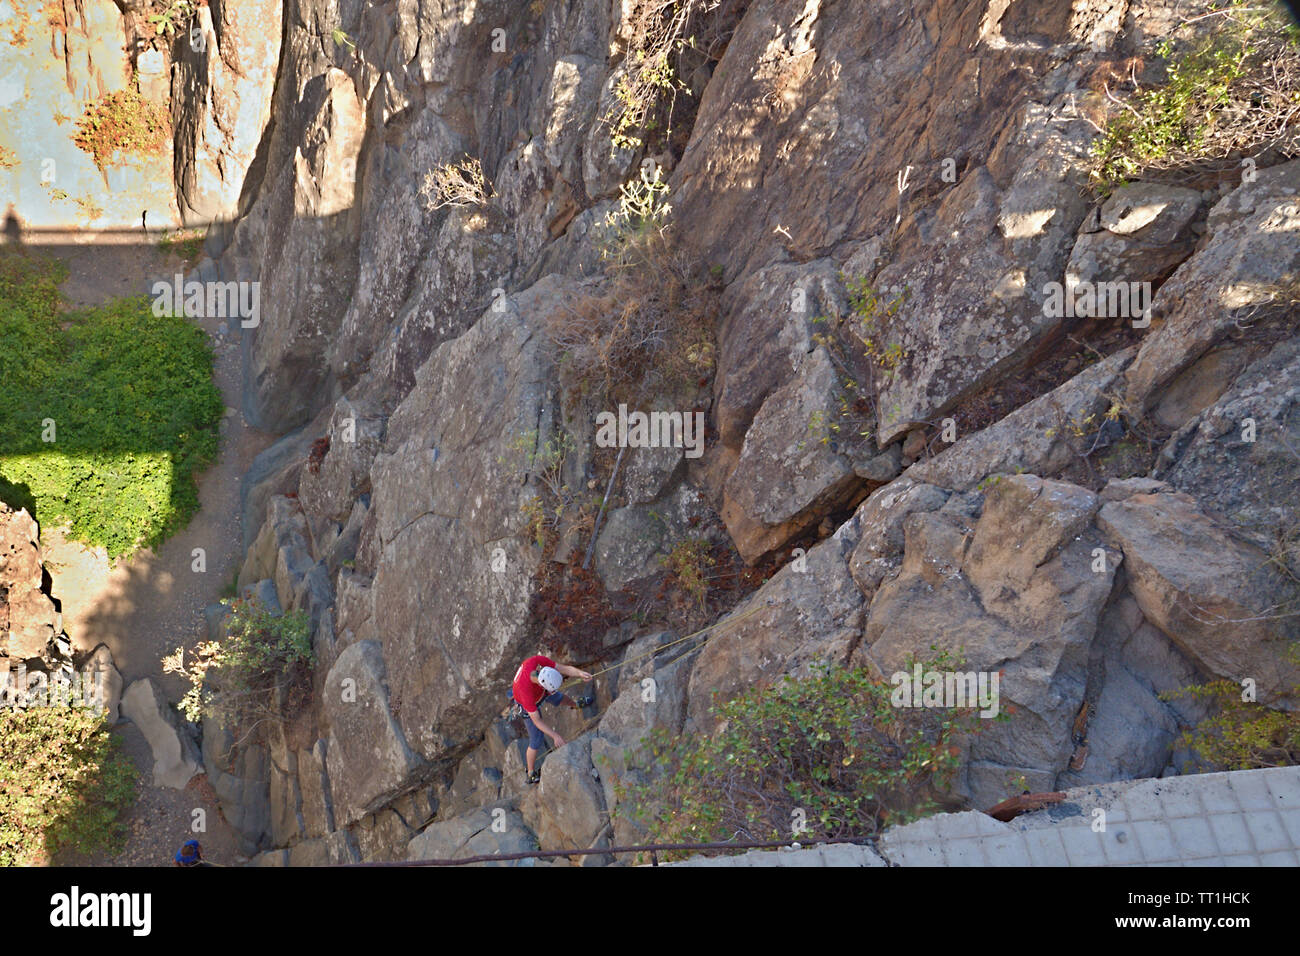 a steep wall climber on the descent can be seen from above, but unidentifiable. Entrance to the gorge, TF-28 Polegre entrada C. La Vera) (Arico-Teneri Stock Photo